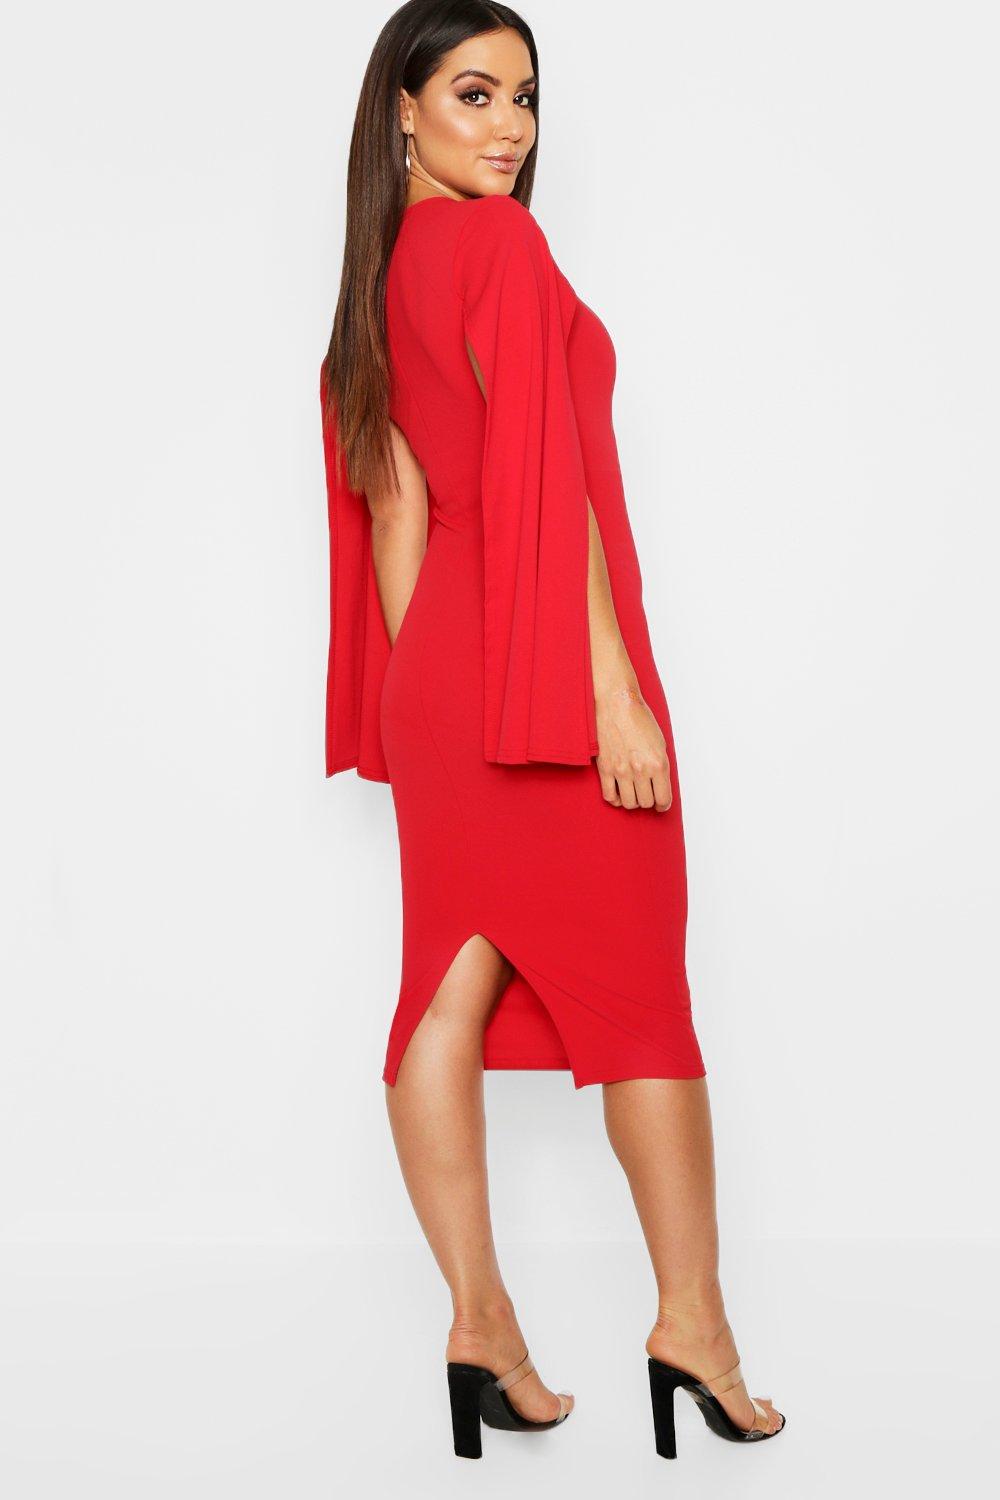 red dress with cape sleeves